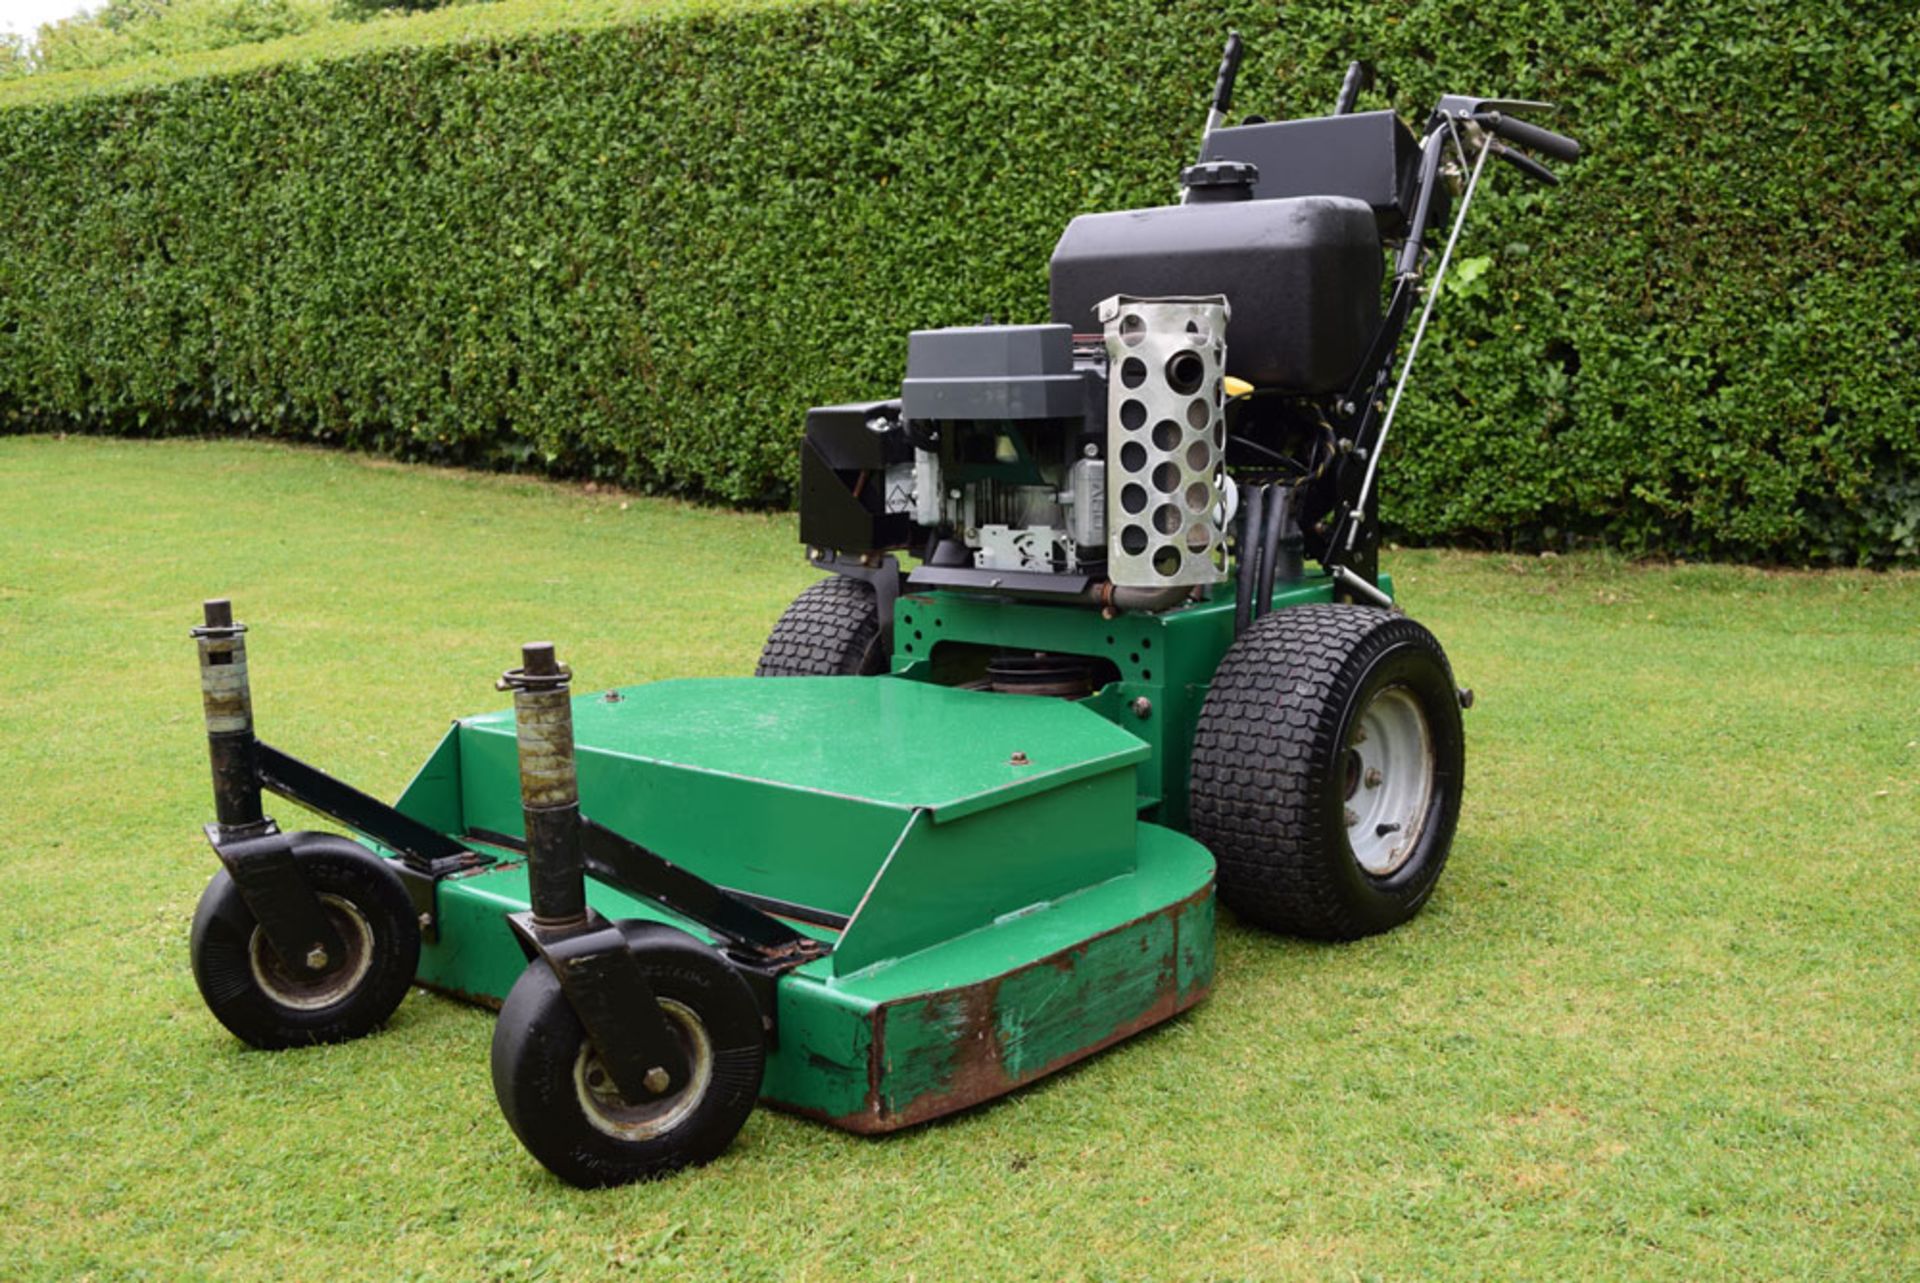 2008 Ransomes Pedestrian 36"""" Commercial Walk Behind Zero Turn Rotary Mower - Image 2 of 3